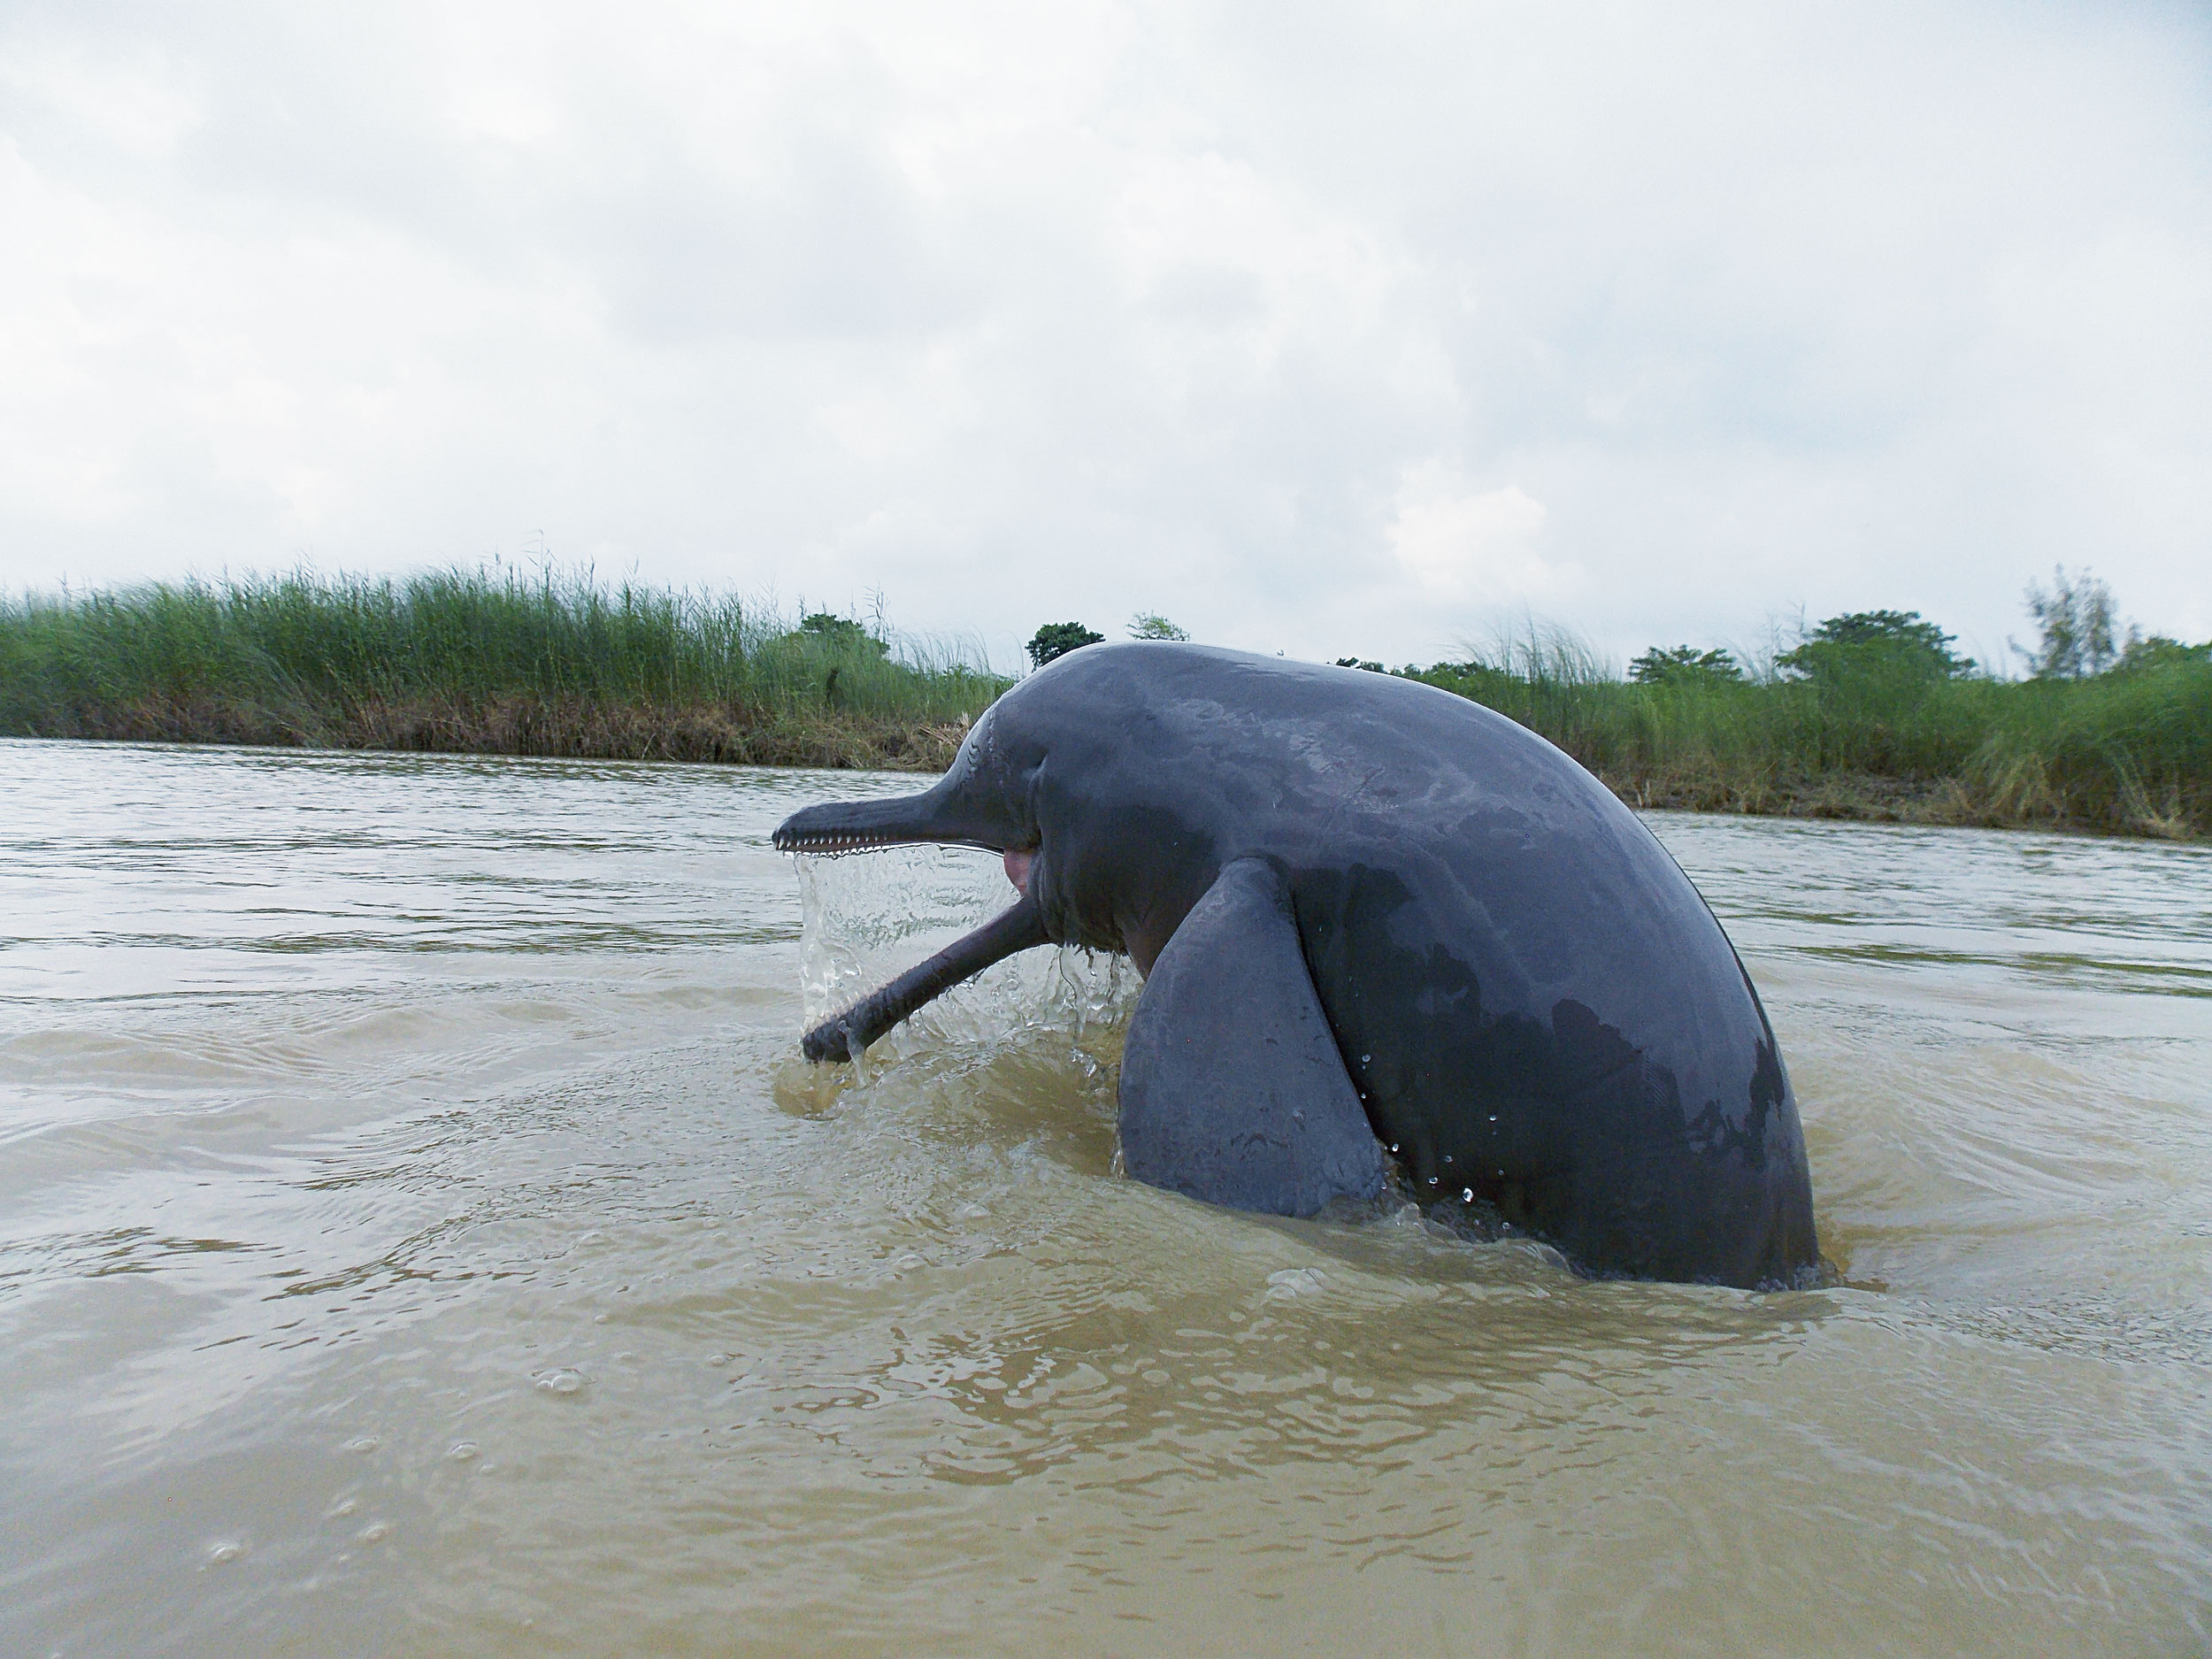 Increasing river traffic, the continuous honking and other high-frequency sounds emitted by large vessels have made it difficult for Gangetic dolphins to communicate amongst themselves